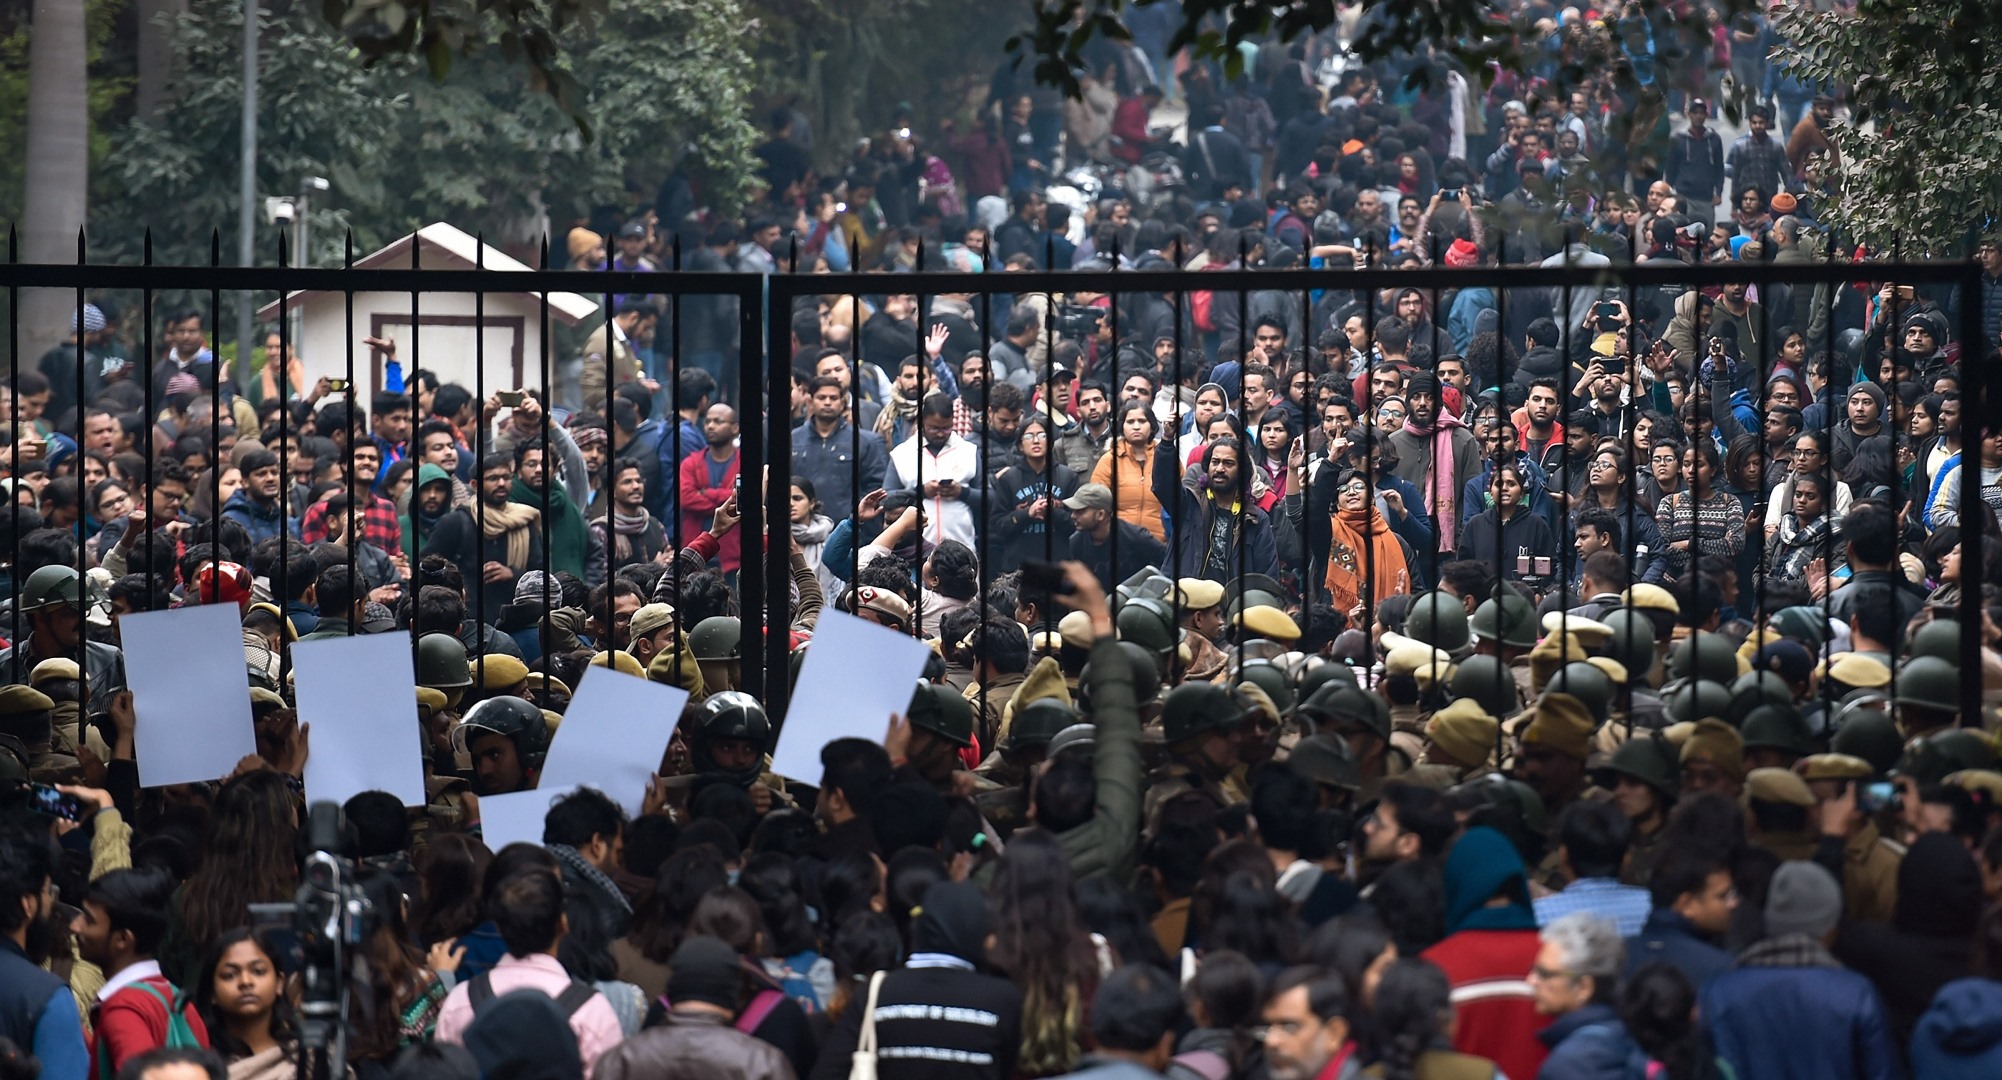 New Delhi: Students stage a protest at main Gate of JNU over Sunday's violence, in New Delhi, Monday, Jan. 6, 2020. A group of masked men and women armed with sticks, rods and acid allegedly unleashed violence on the campus of the University in New Delhi, Sunday evening.(PTI Photo/Atul Yadav)(PTI1_6_2020_000147B)